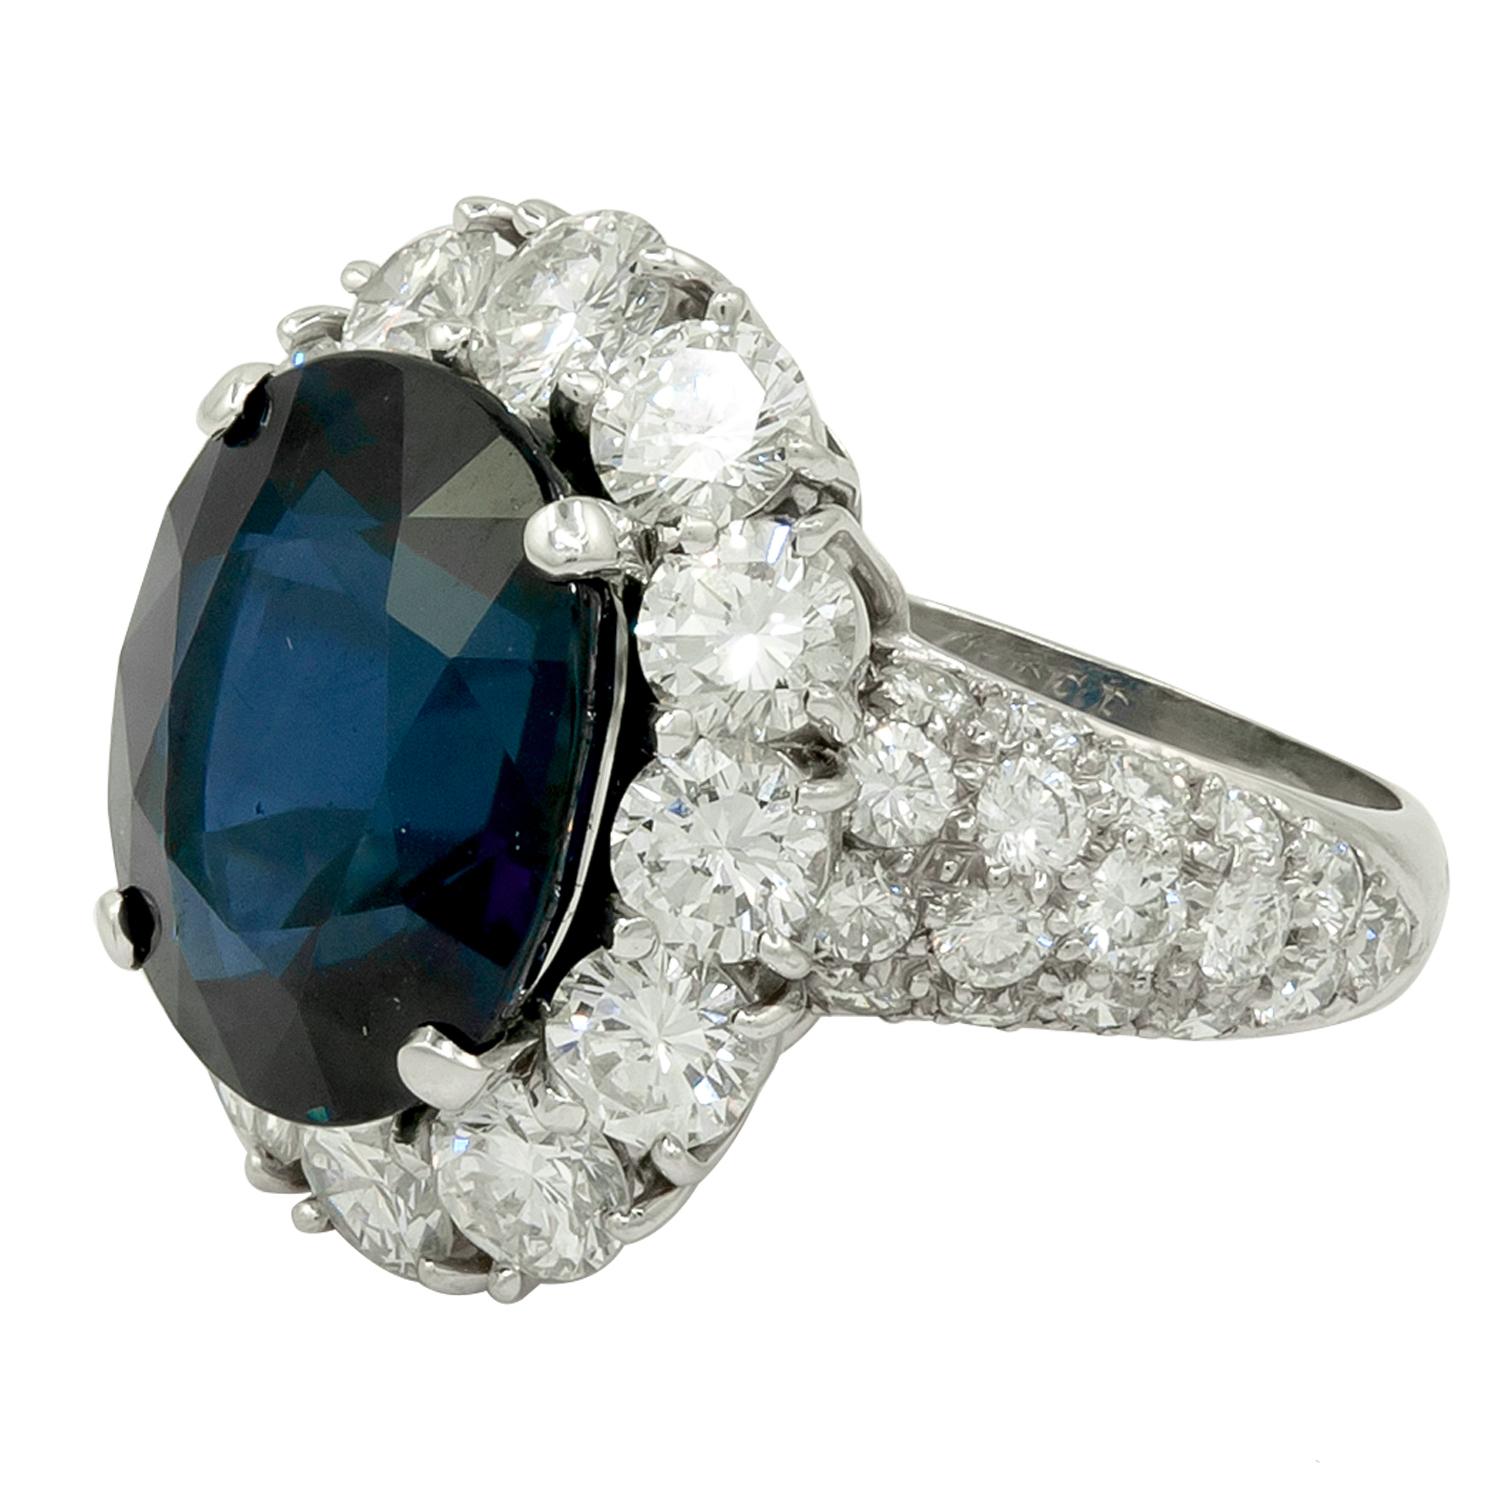 VAN CLEEF & ARPELS Oval-Shaped Sapphire, Diamond Ring
A platinum ring, set with Thailand oval-shaped sapphire, and round brilliant-cut diamonds.
Thailand sapphire weight approx. 10.28 cts. with  AGL certificate
Signed “VAN CLEEF & ARPELS“; circa